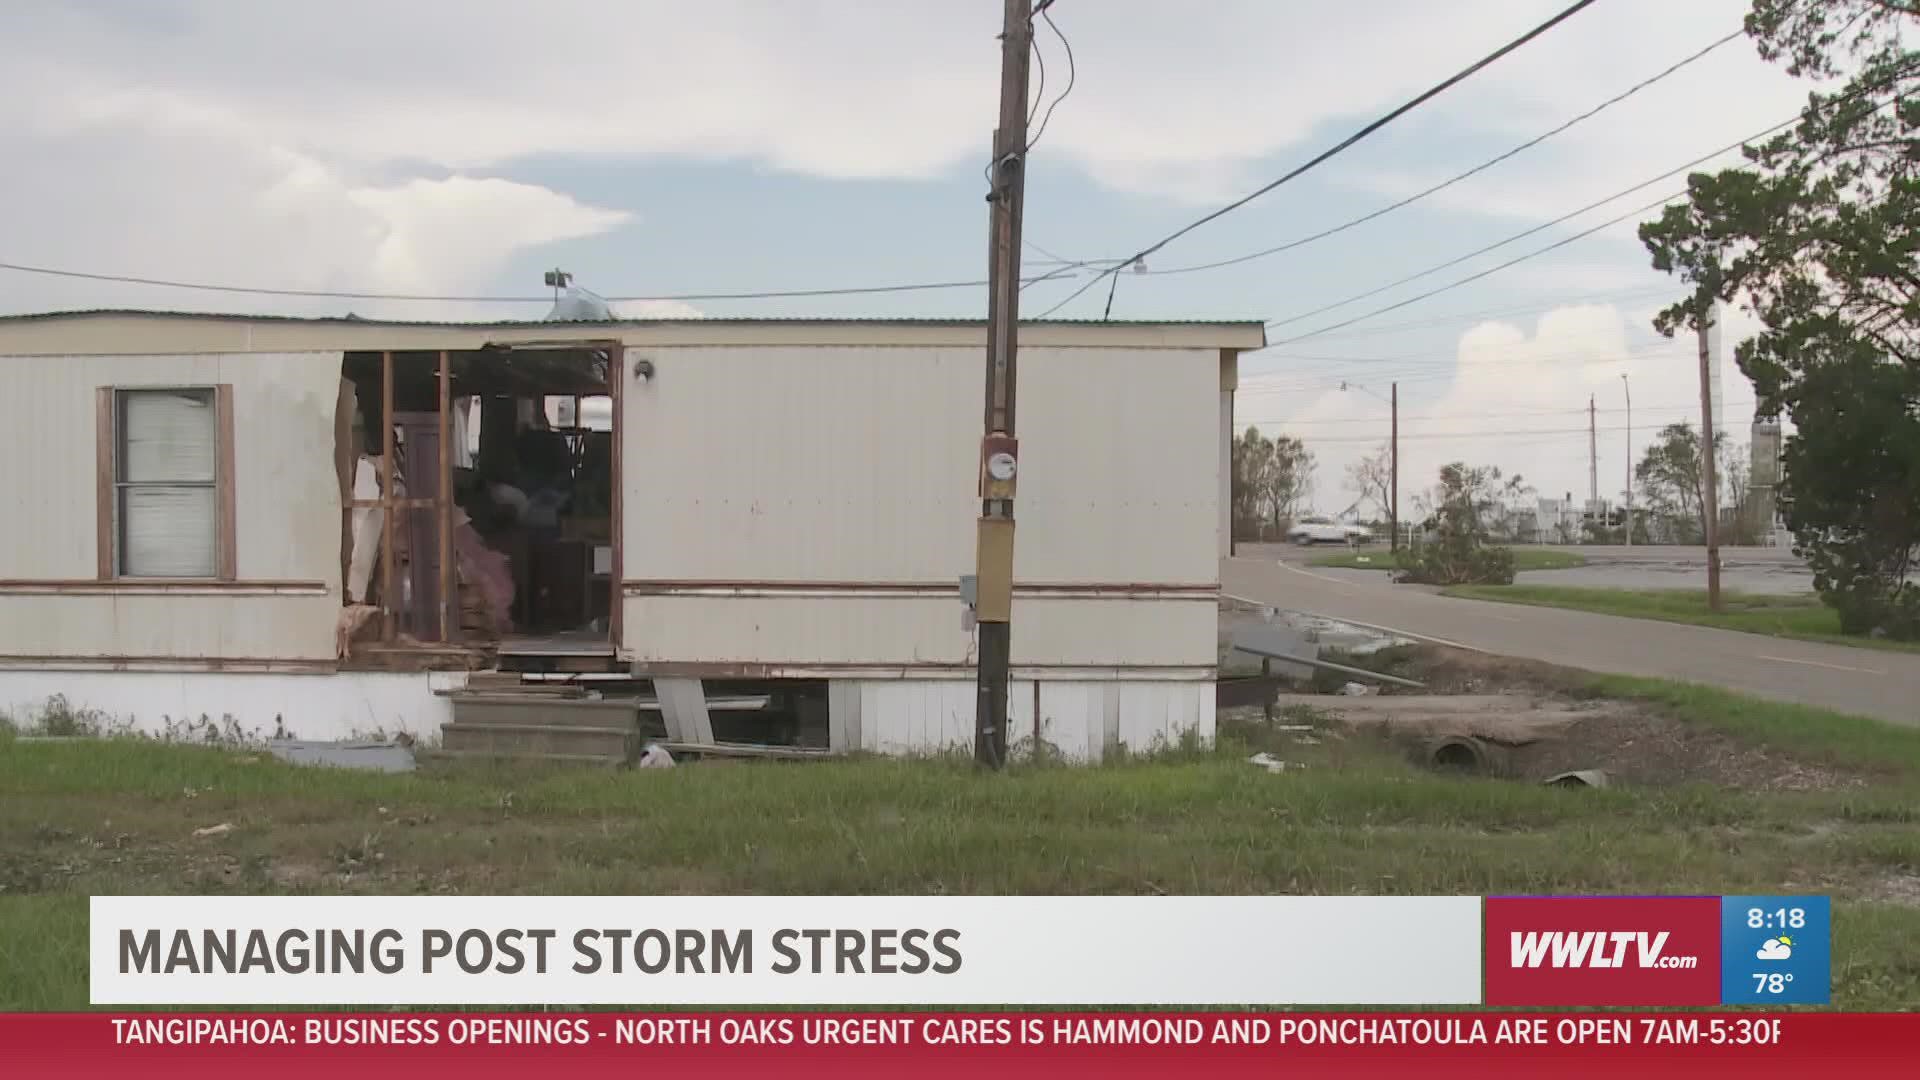 Ashlie Martinez, an Ochsner licensed clinical social worker, breakdowns different ways stress manifests and shares tips for managing post-storm stress.